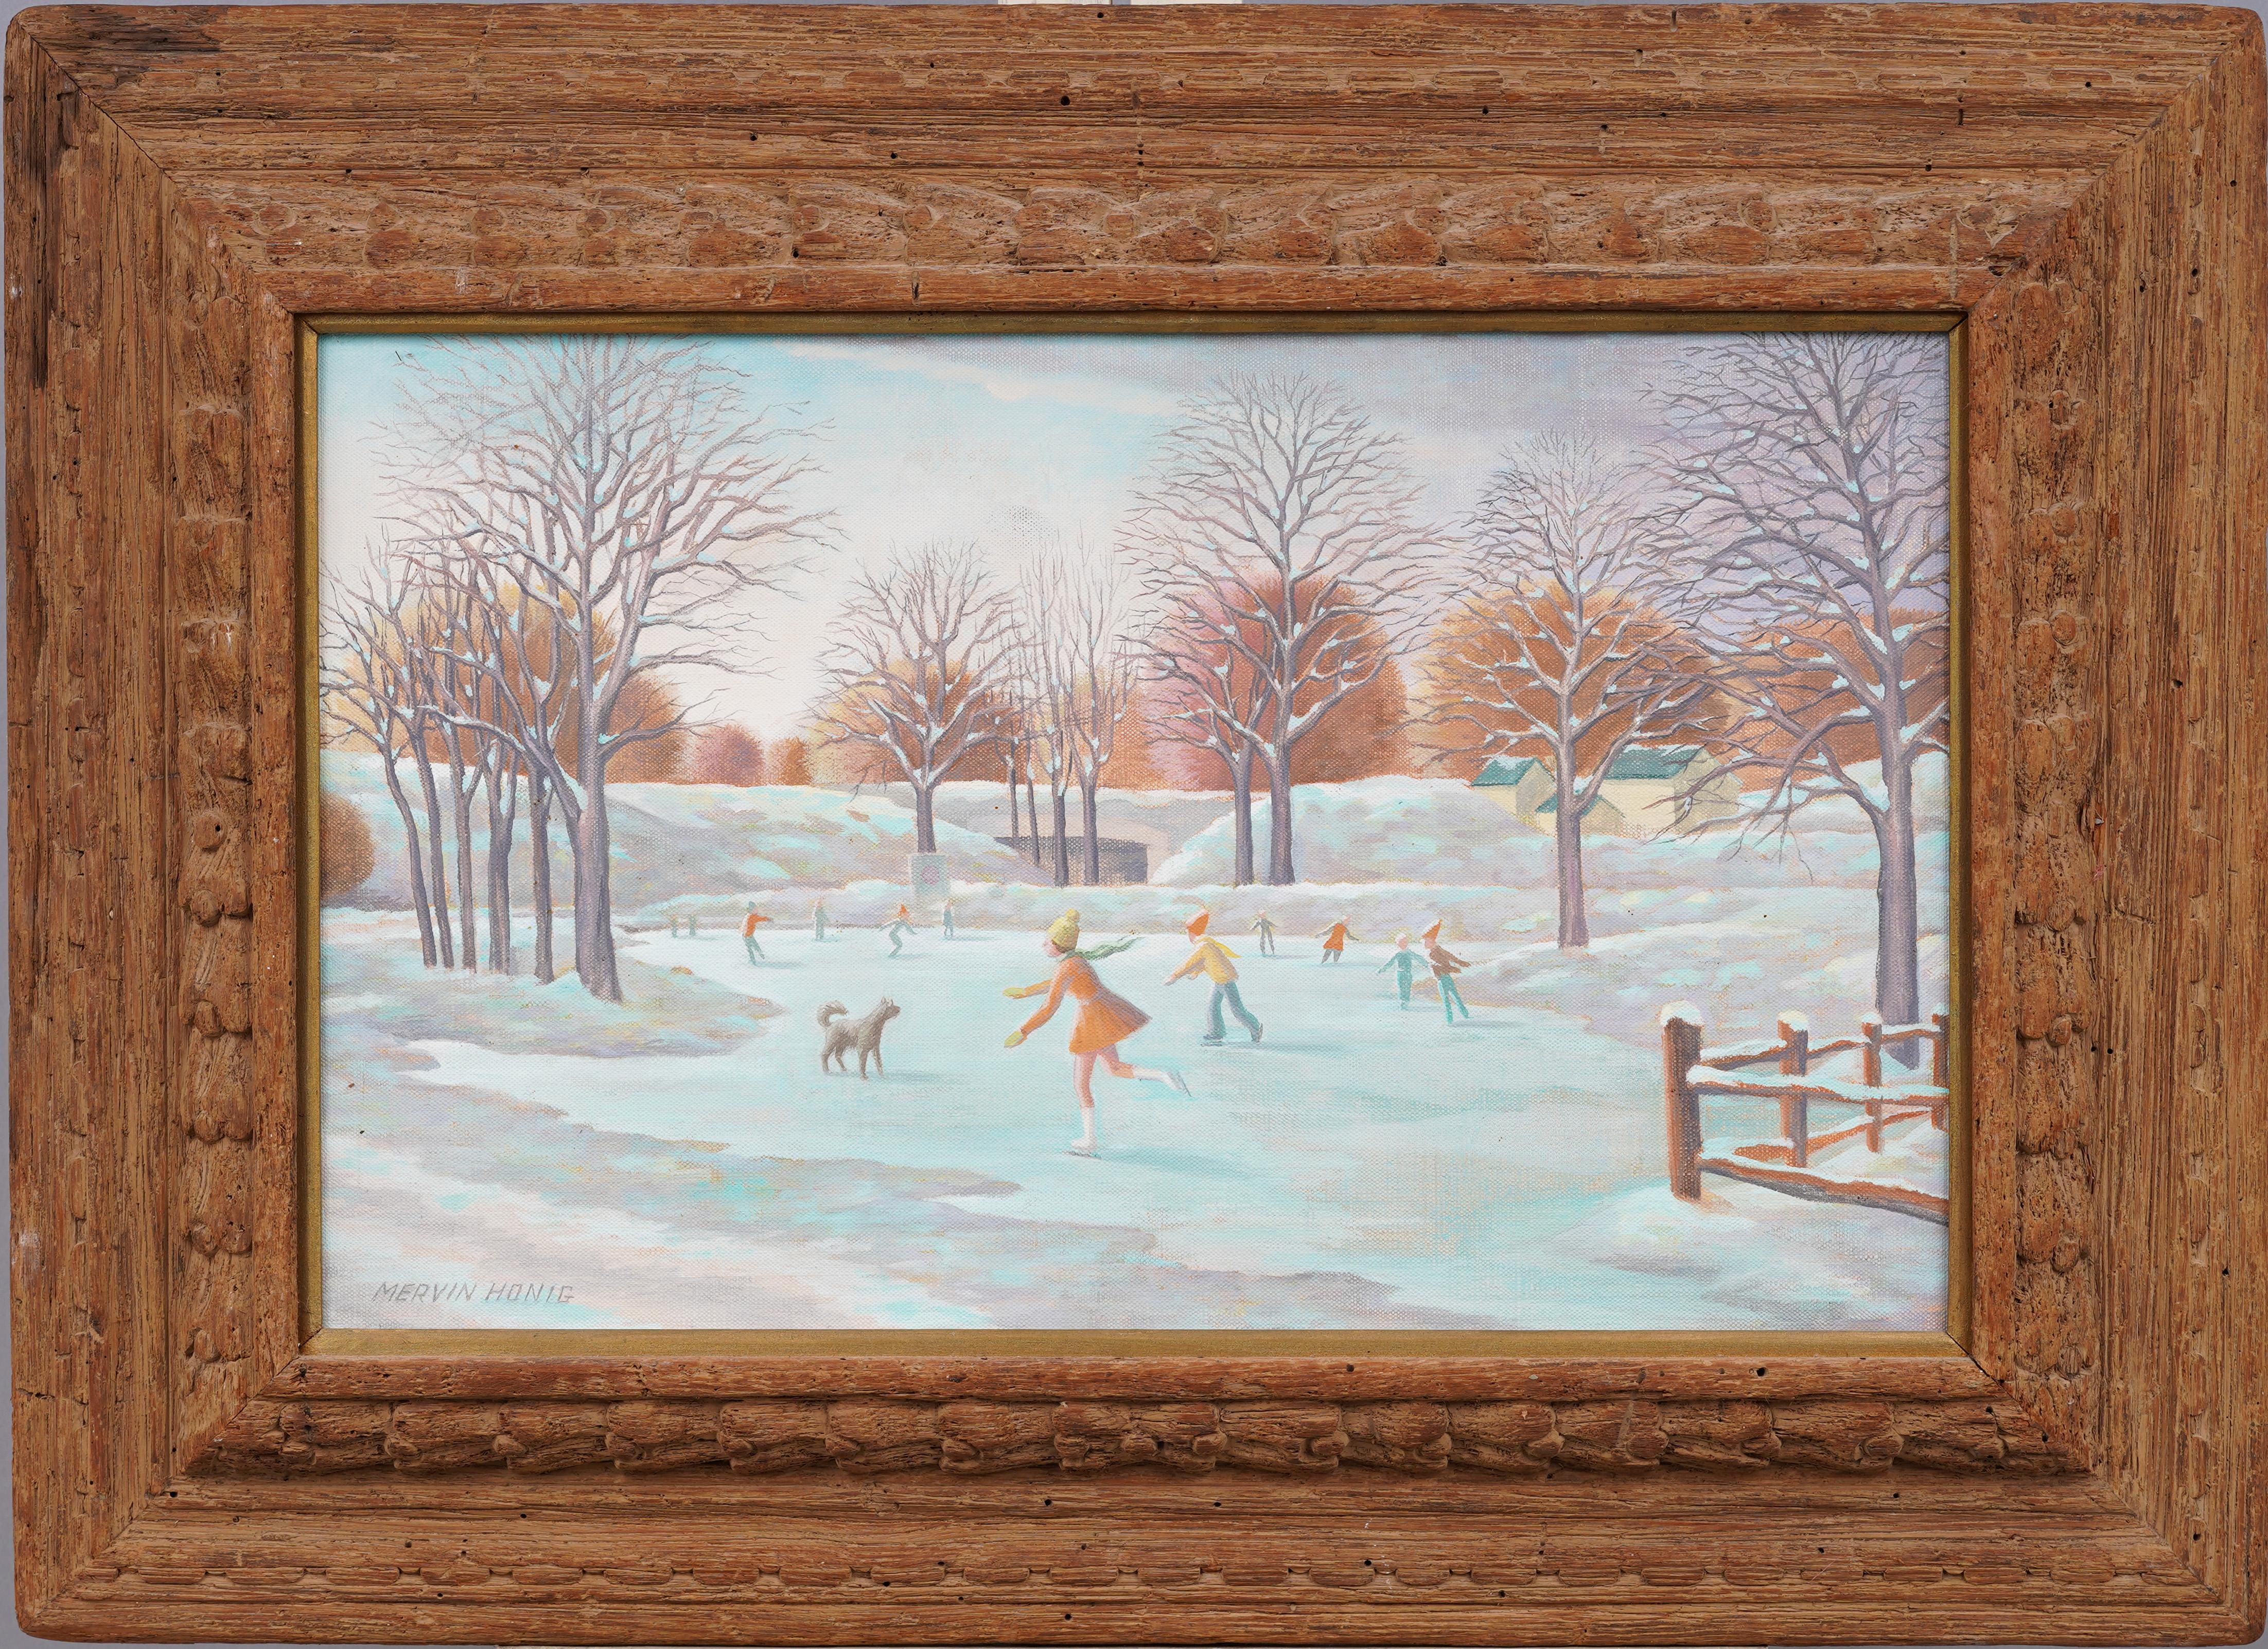 Impressive American modernist winter landscape.  Detailed and well painted skating scene.  Oil on canvas.  Nicely framed.  